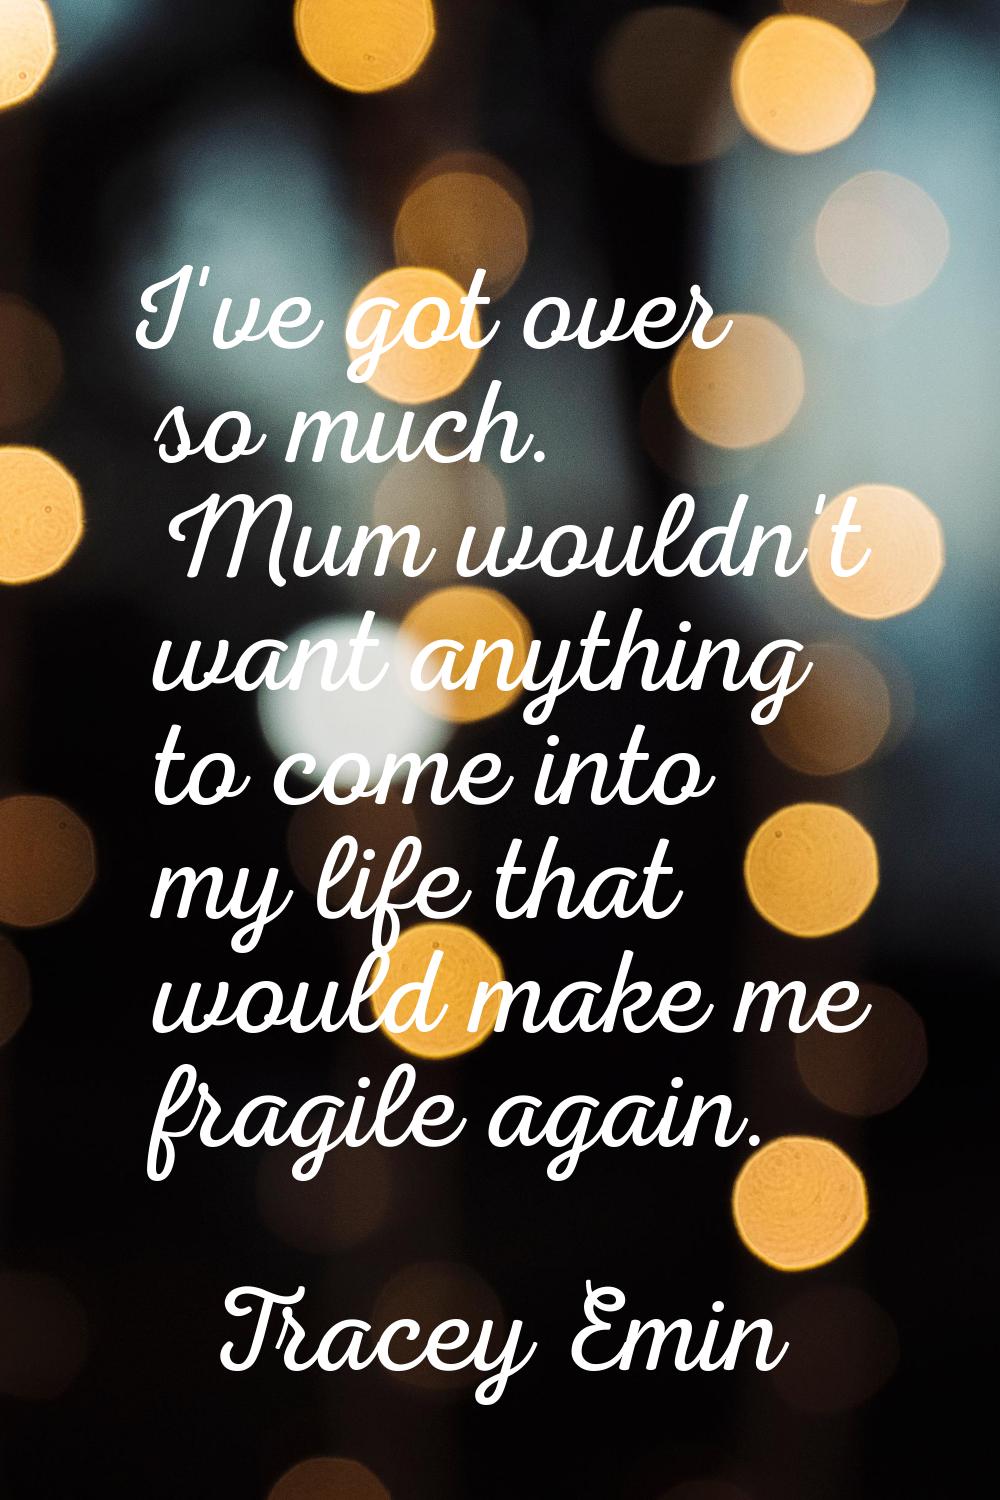 I've got over so much. Mum wouldn't want anything to come into my life that would make me fragile a